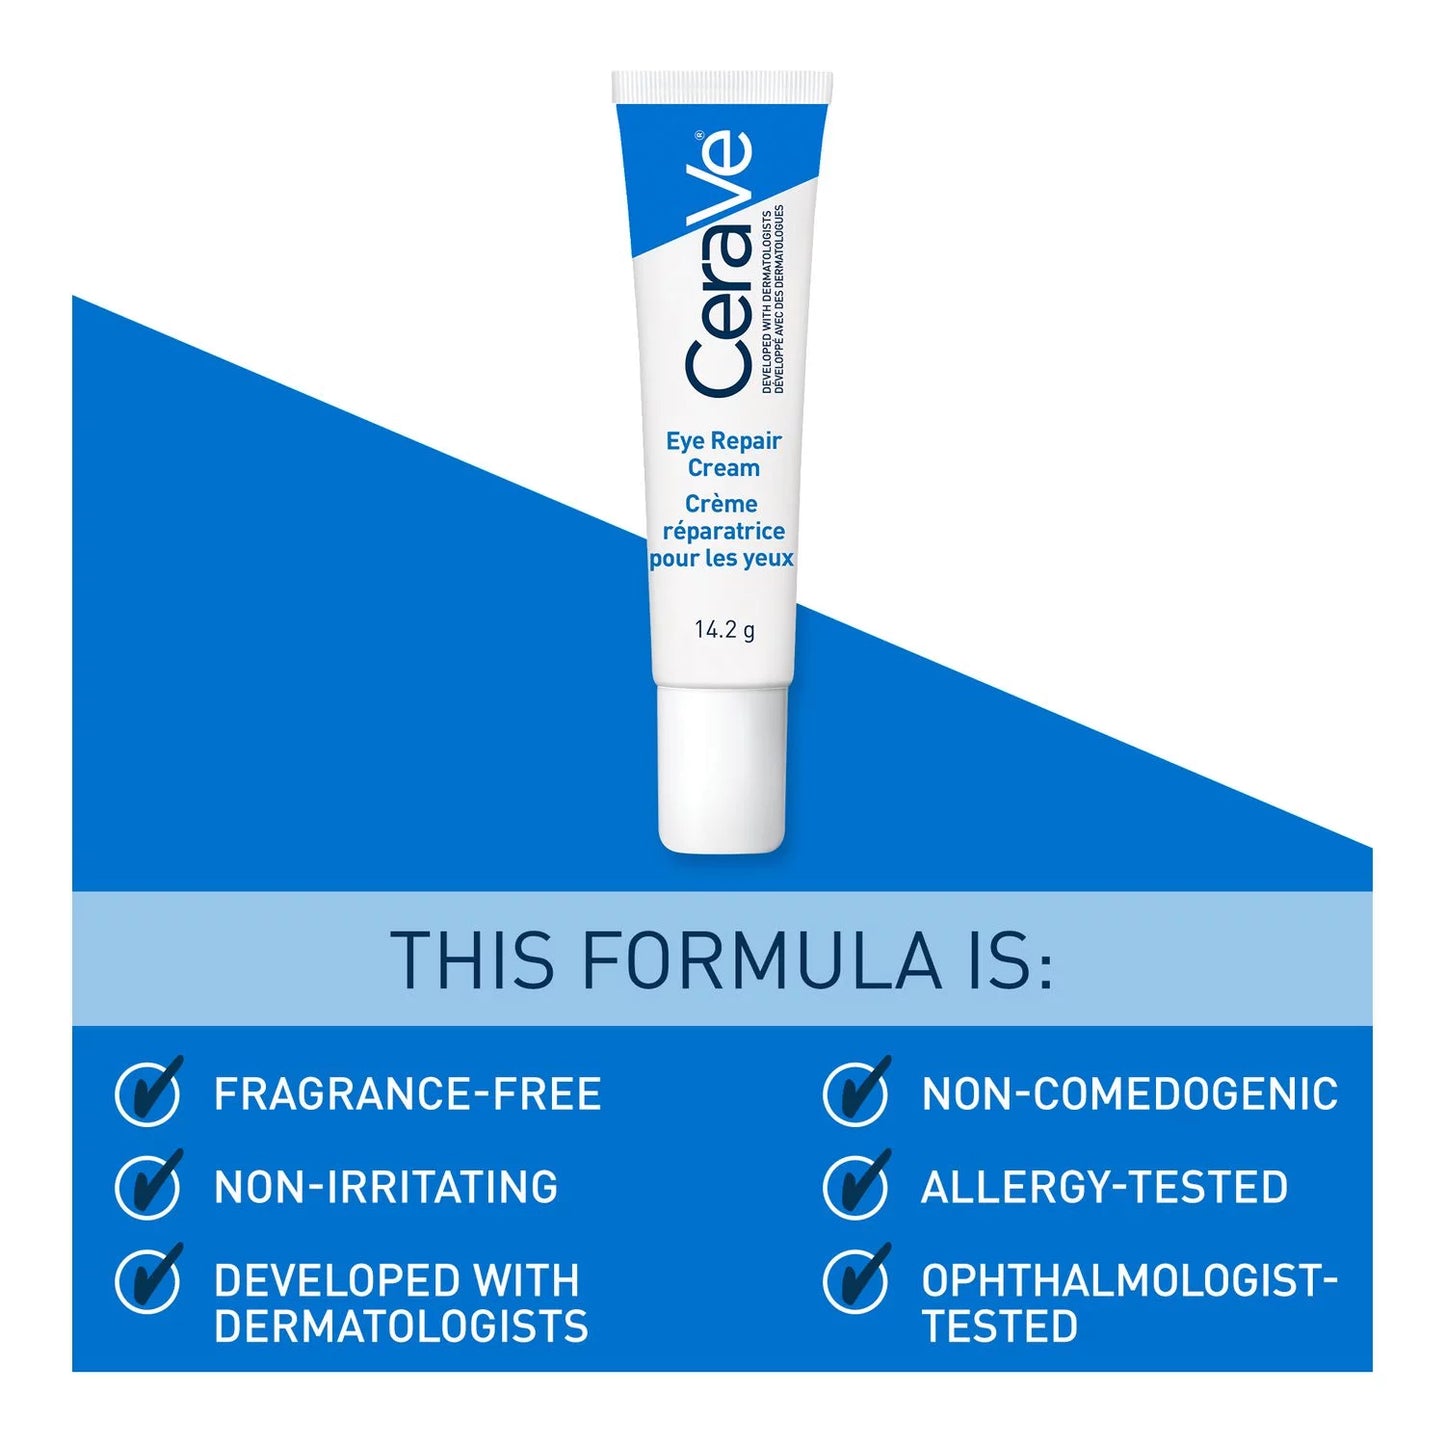 CeraVe, Eye Repair Cream 14.2g All About Skin Doha Skincare Qatar Beauty Cosmetics Available in Qatar Available in Qatar Store all about skin doha qatar skincare cosmetics beauty